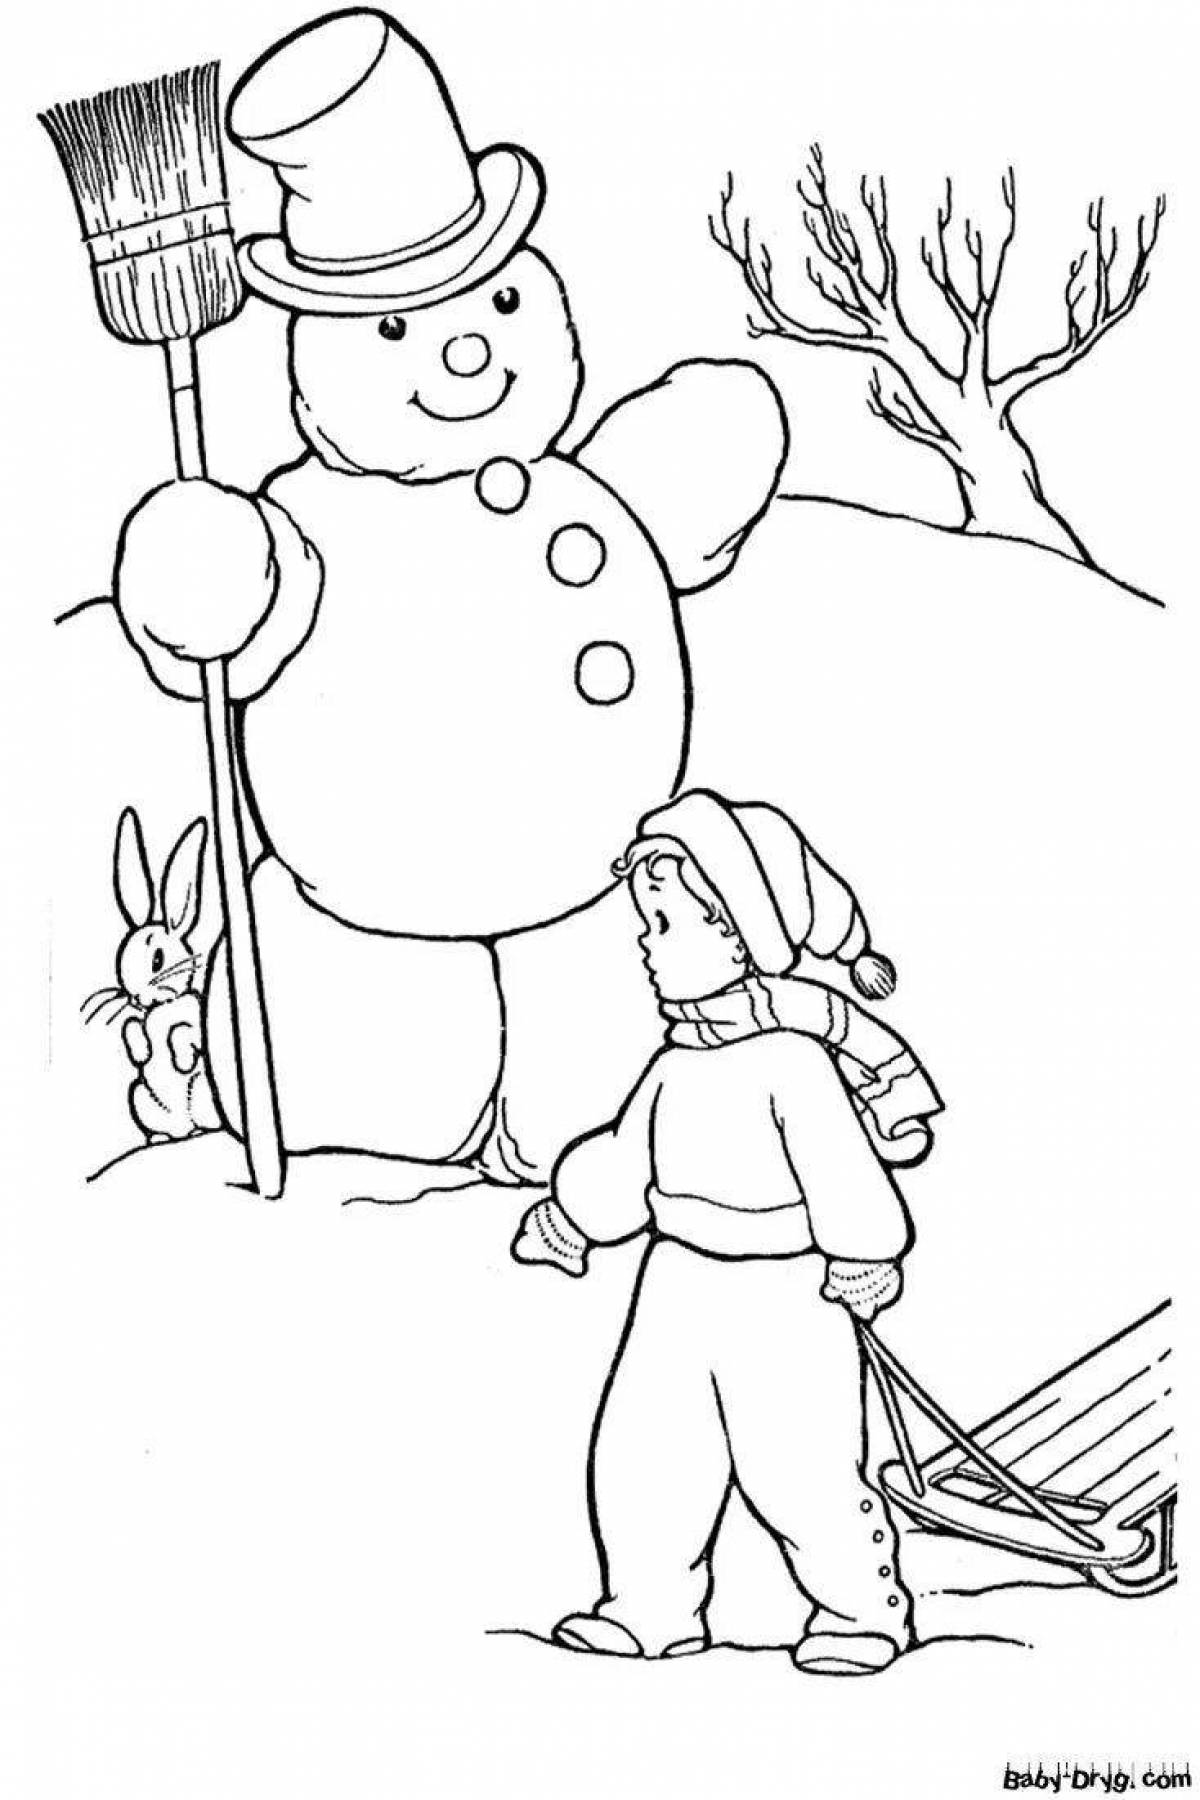 Coloring book rabbit and snowman with colorful splashes